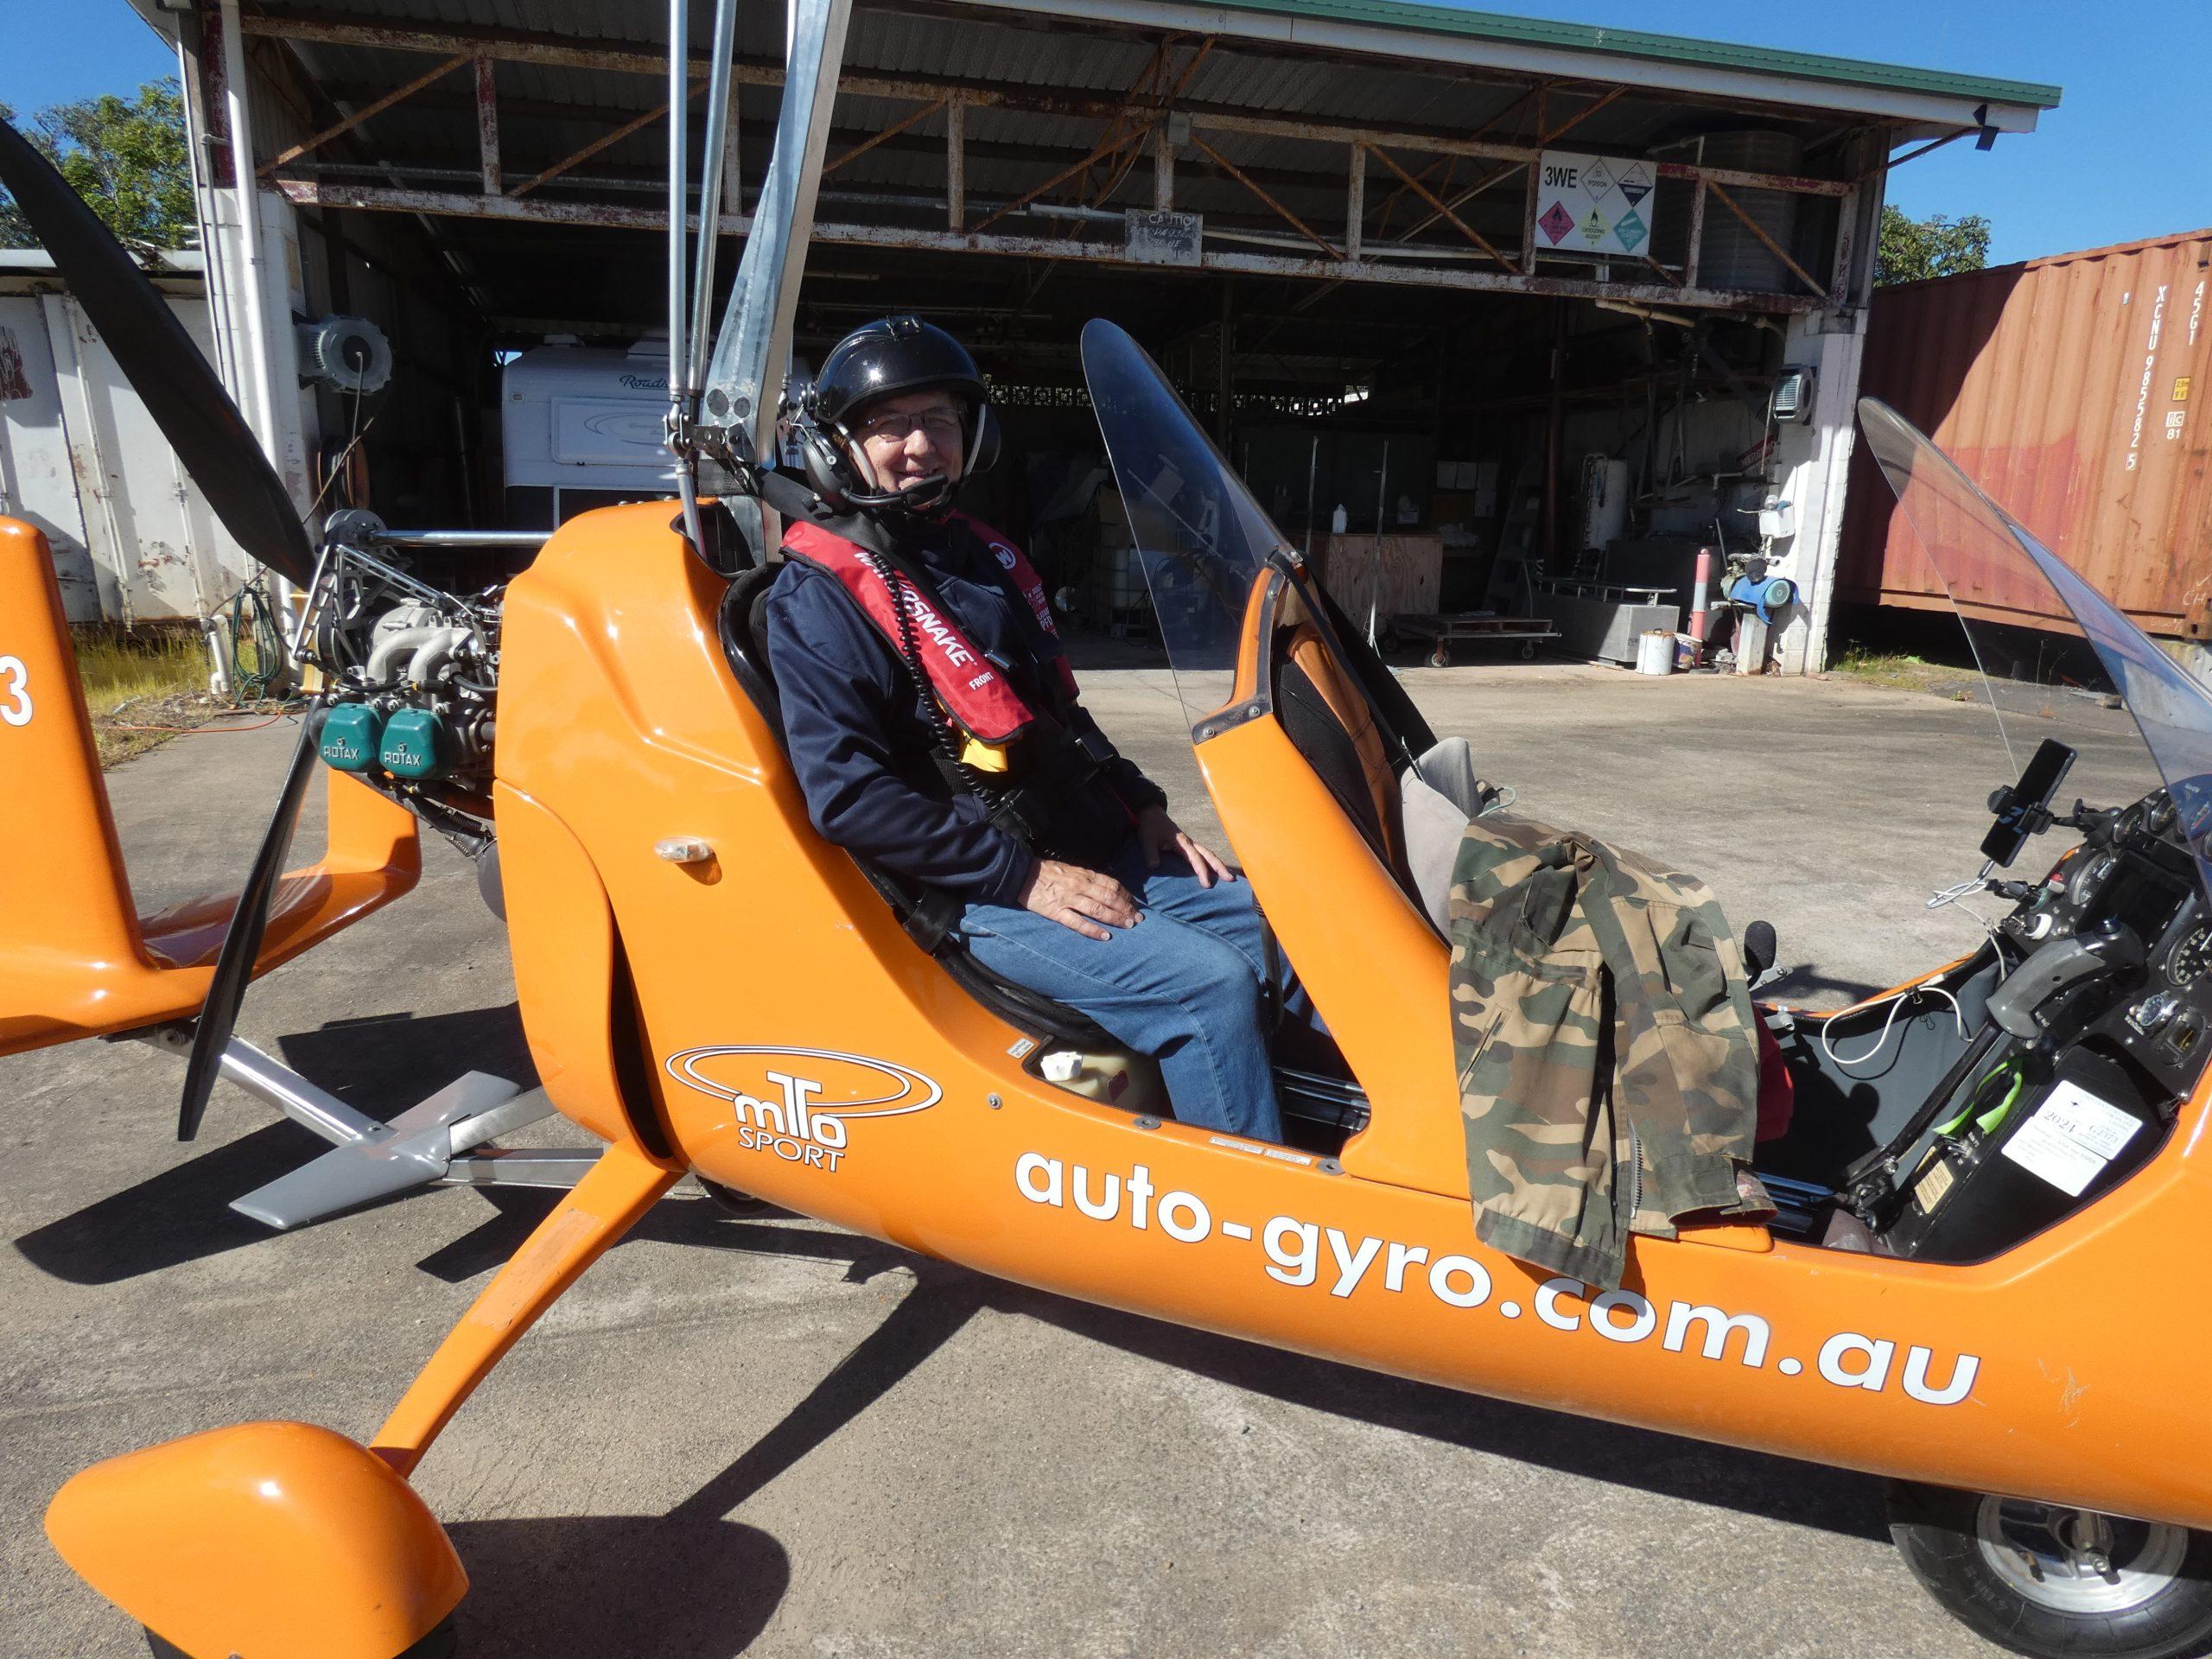 First woman and librarian to fly island in a gyrocopter